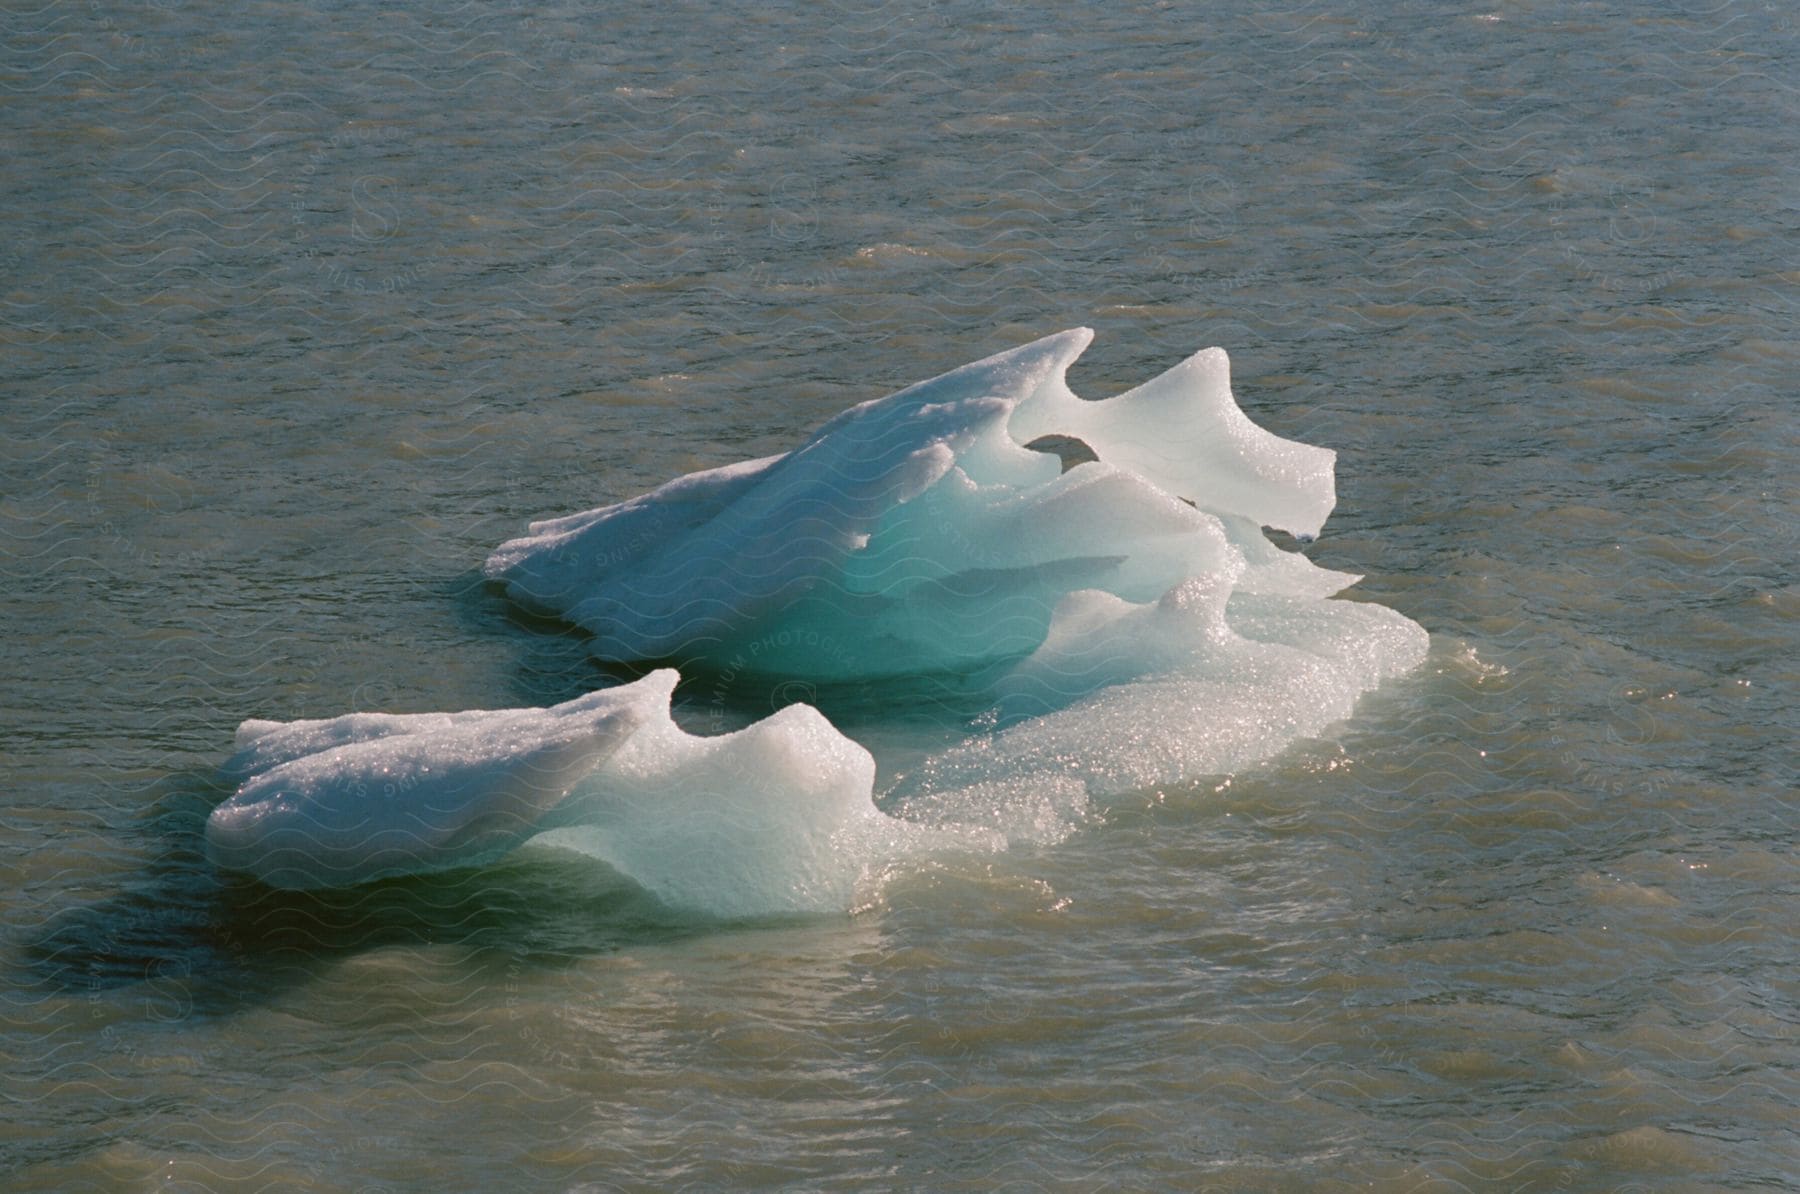 A small melting iceberg floating in calm waters near a shoreline